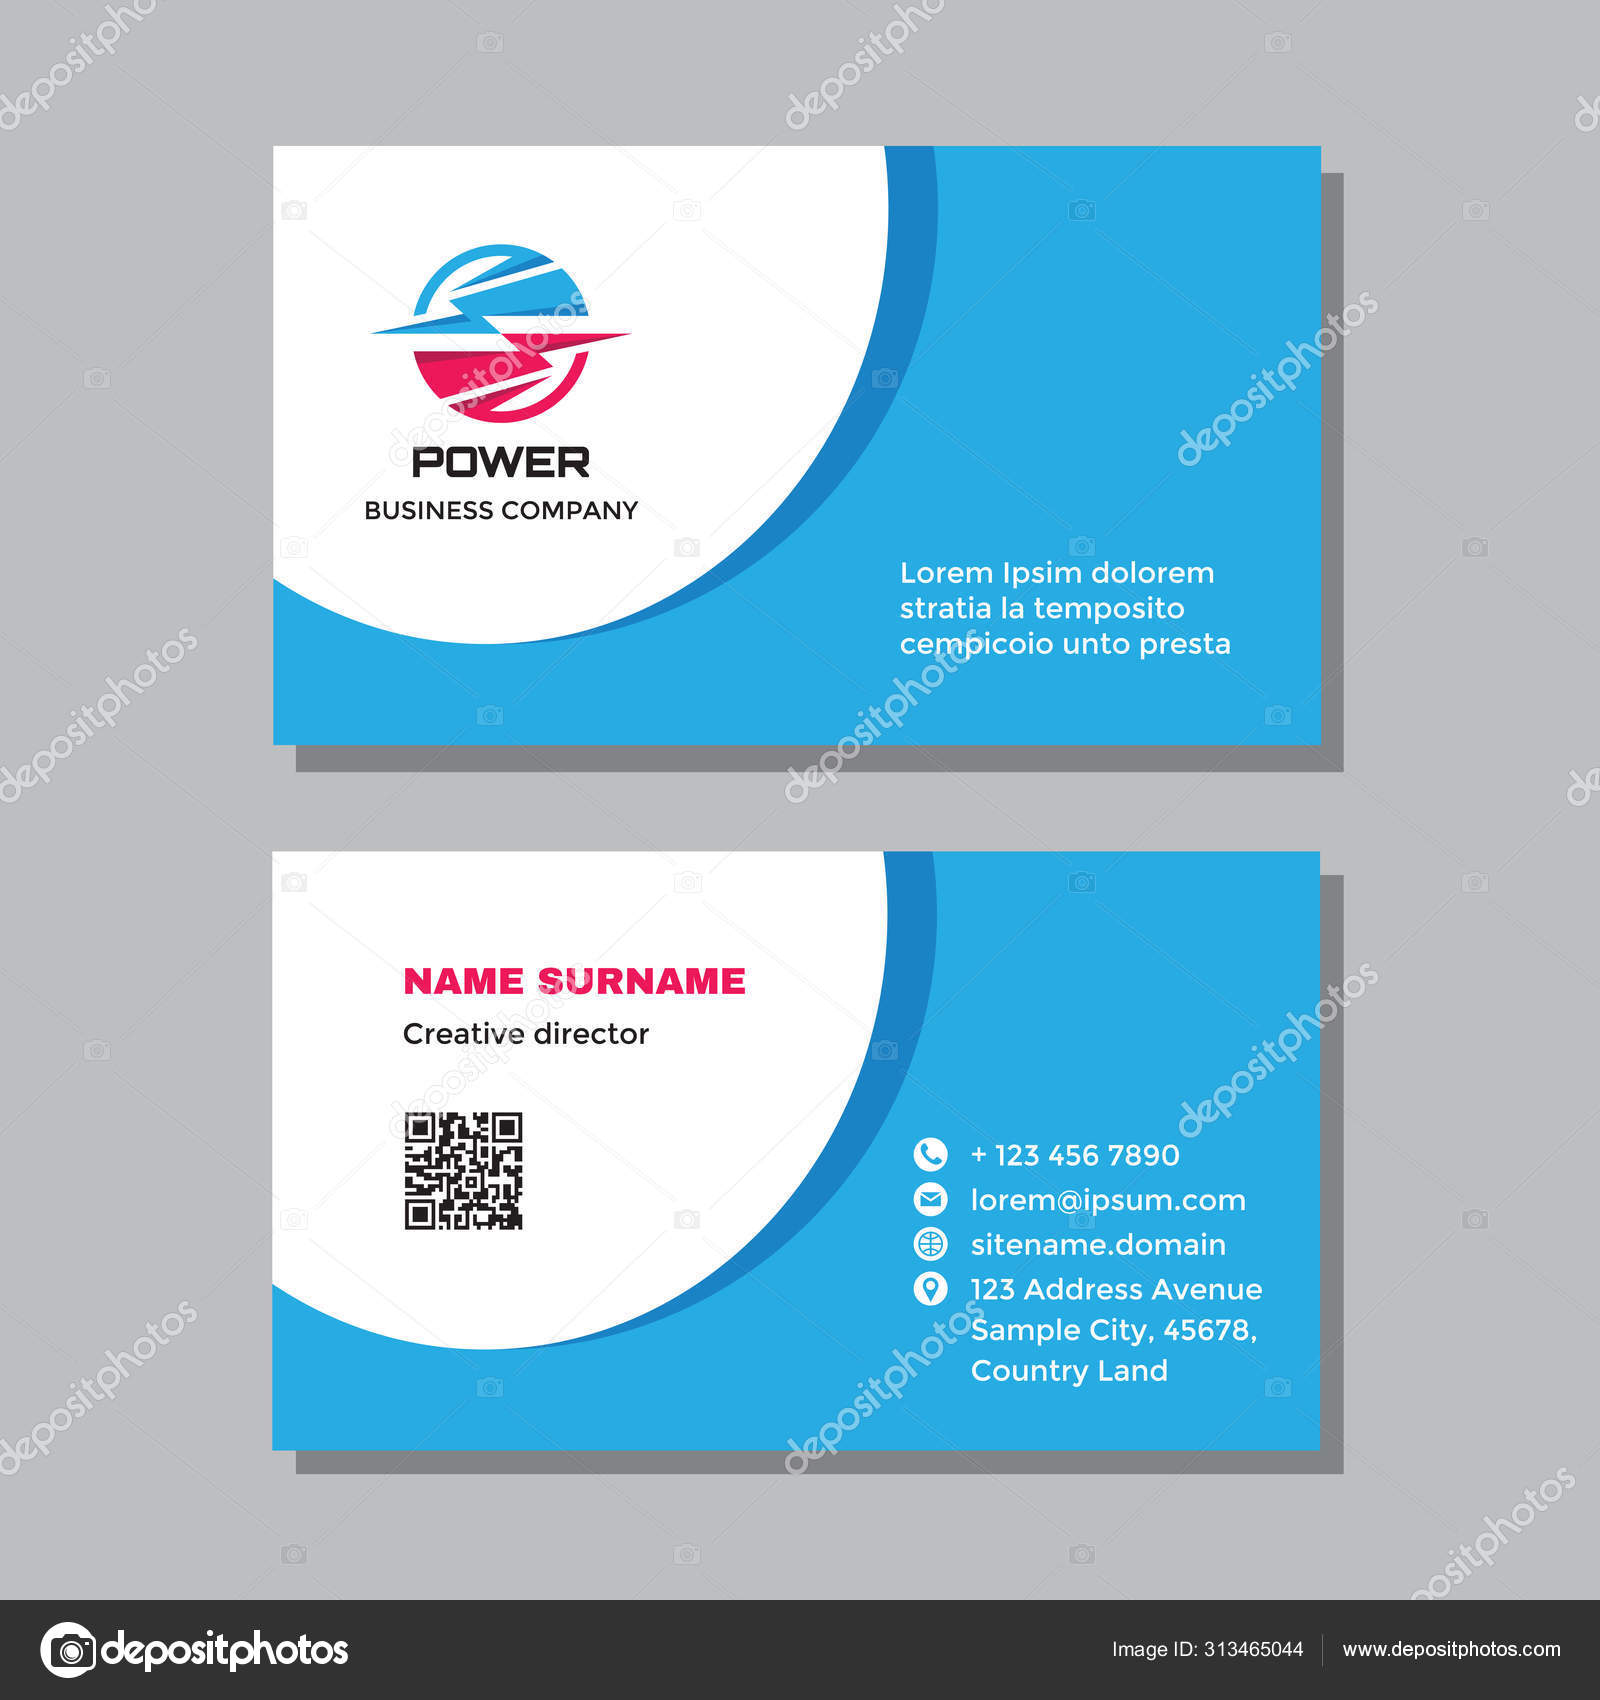 Business Visit Card Template Logo Concept Design Computer Network Intended For Networking Card Template